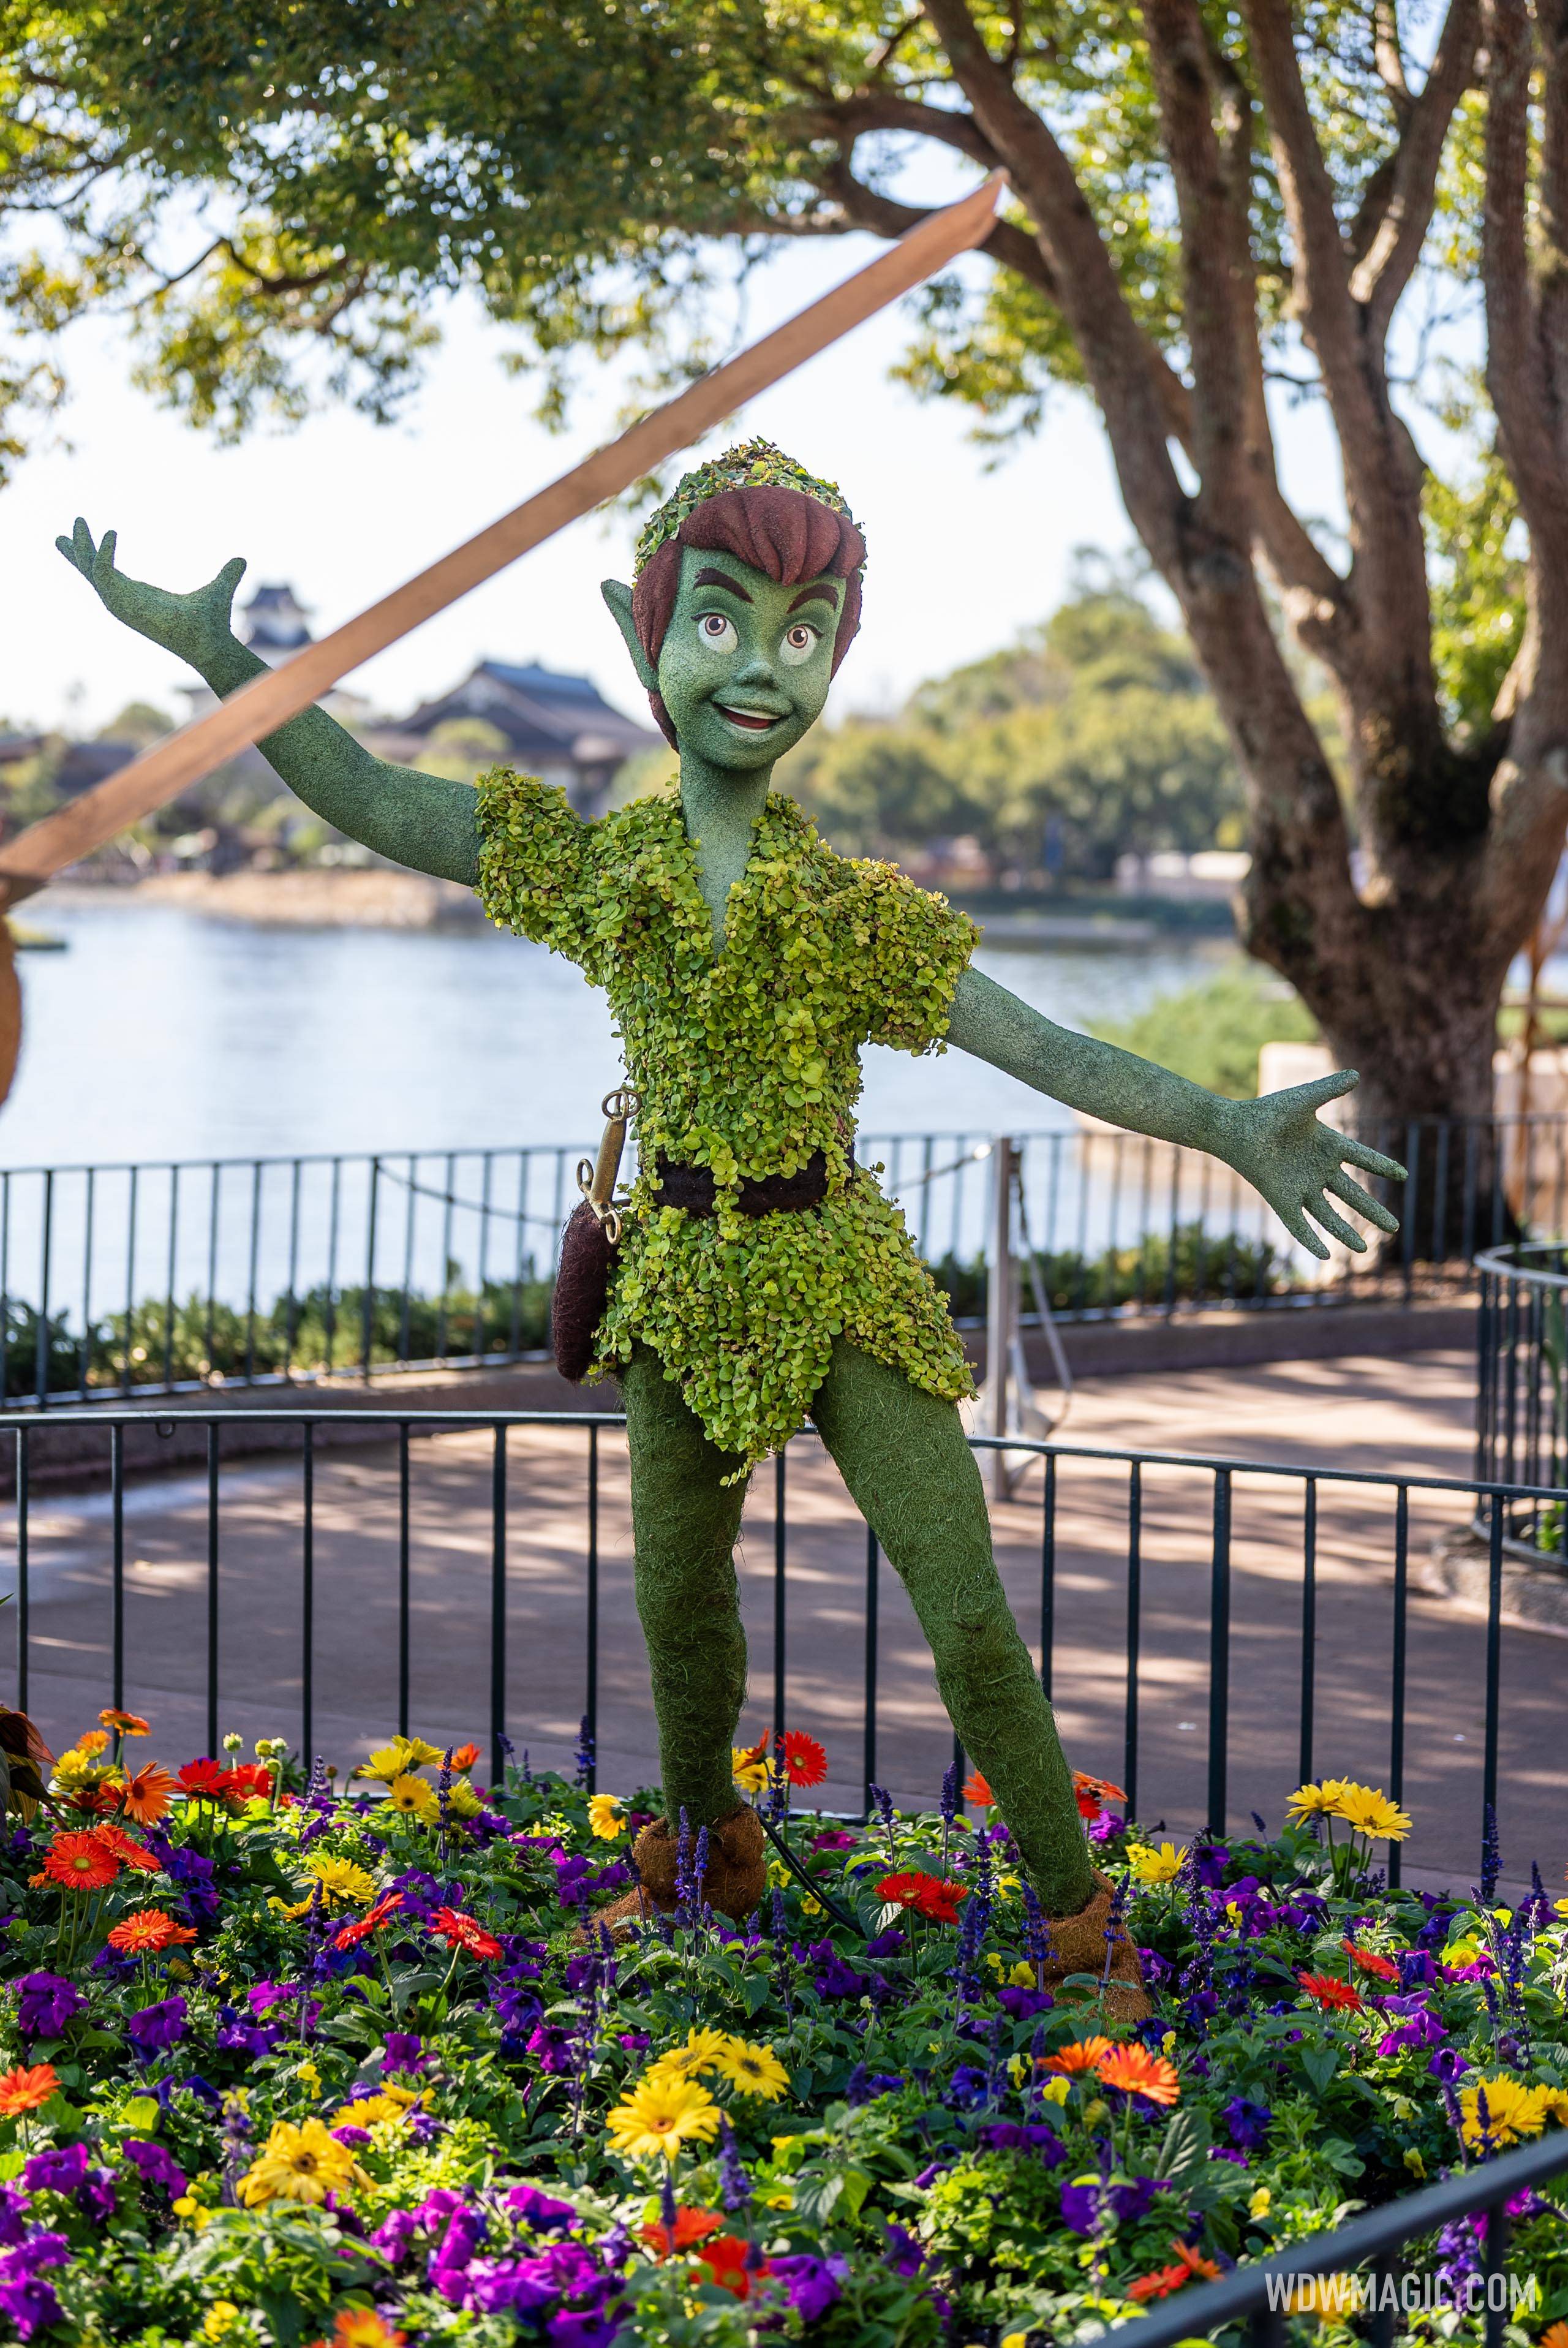 Peter Pan, Captain Hook and Tick Tock Croc, World Showcase – Between United Kingdom and Canada Pavilions